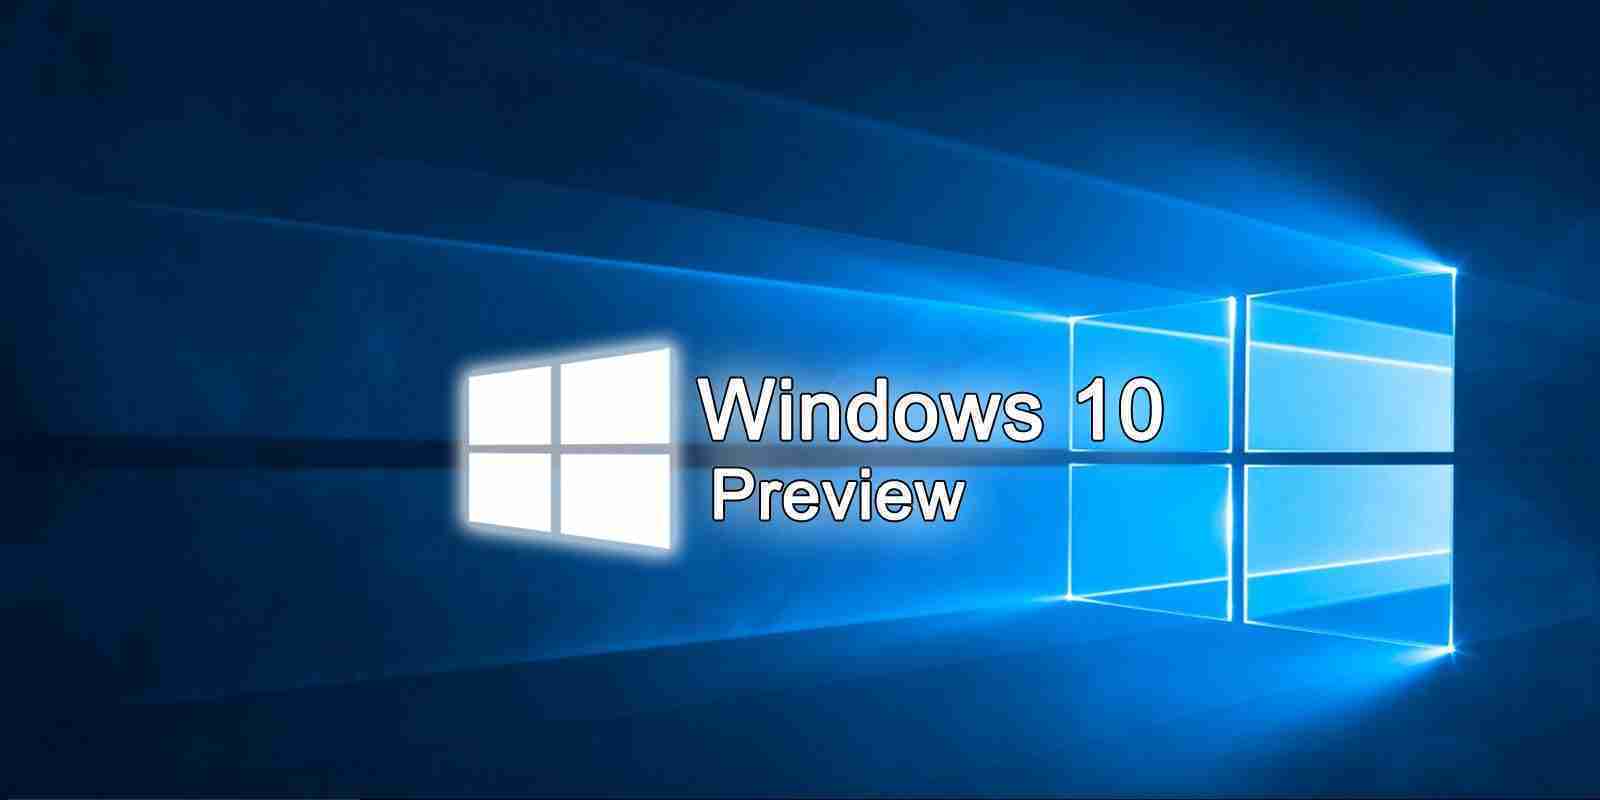 Windows 10 pro insider preview to full version download